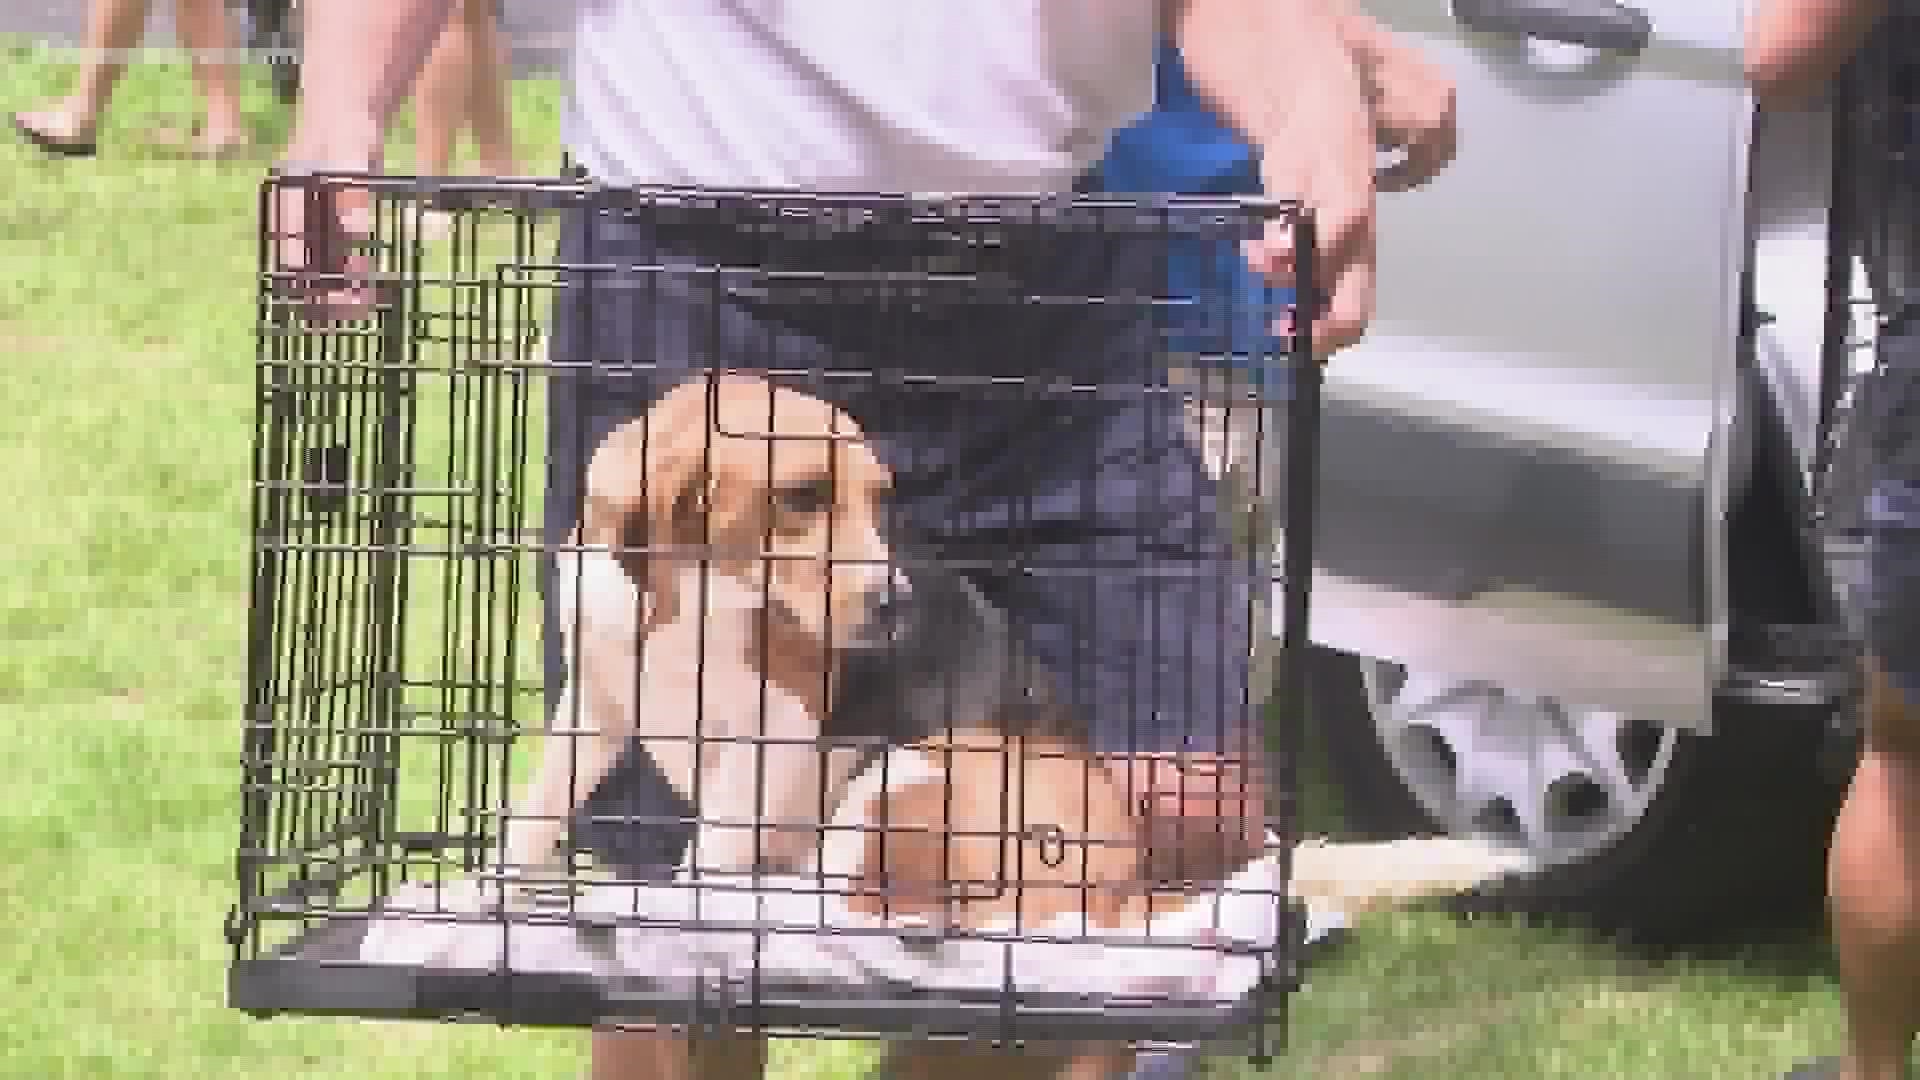 "Homes Fur Hounds" received about 30 of the thousands of dogs seized earlier this year.